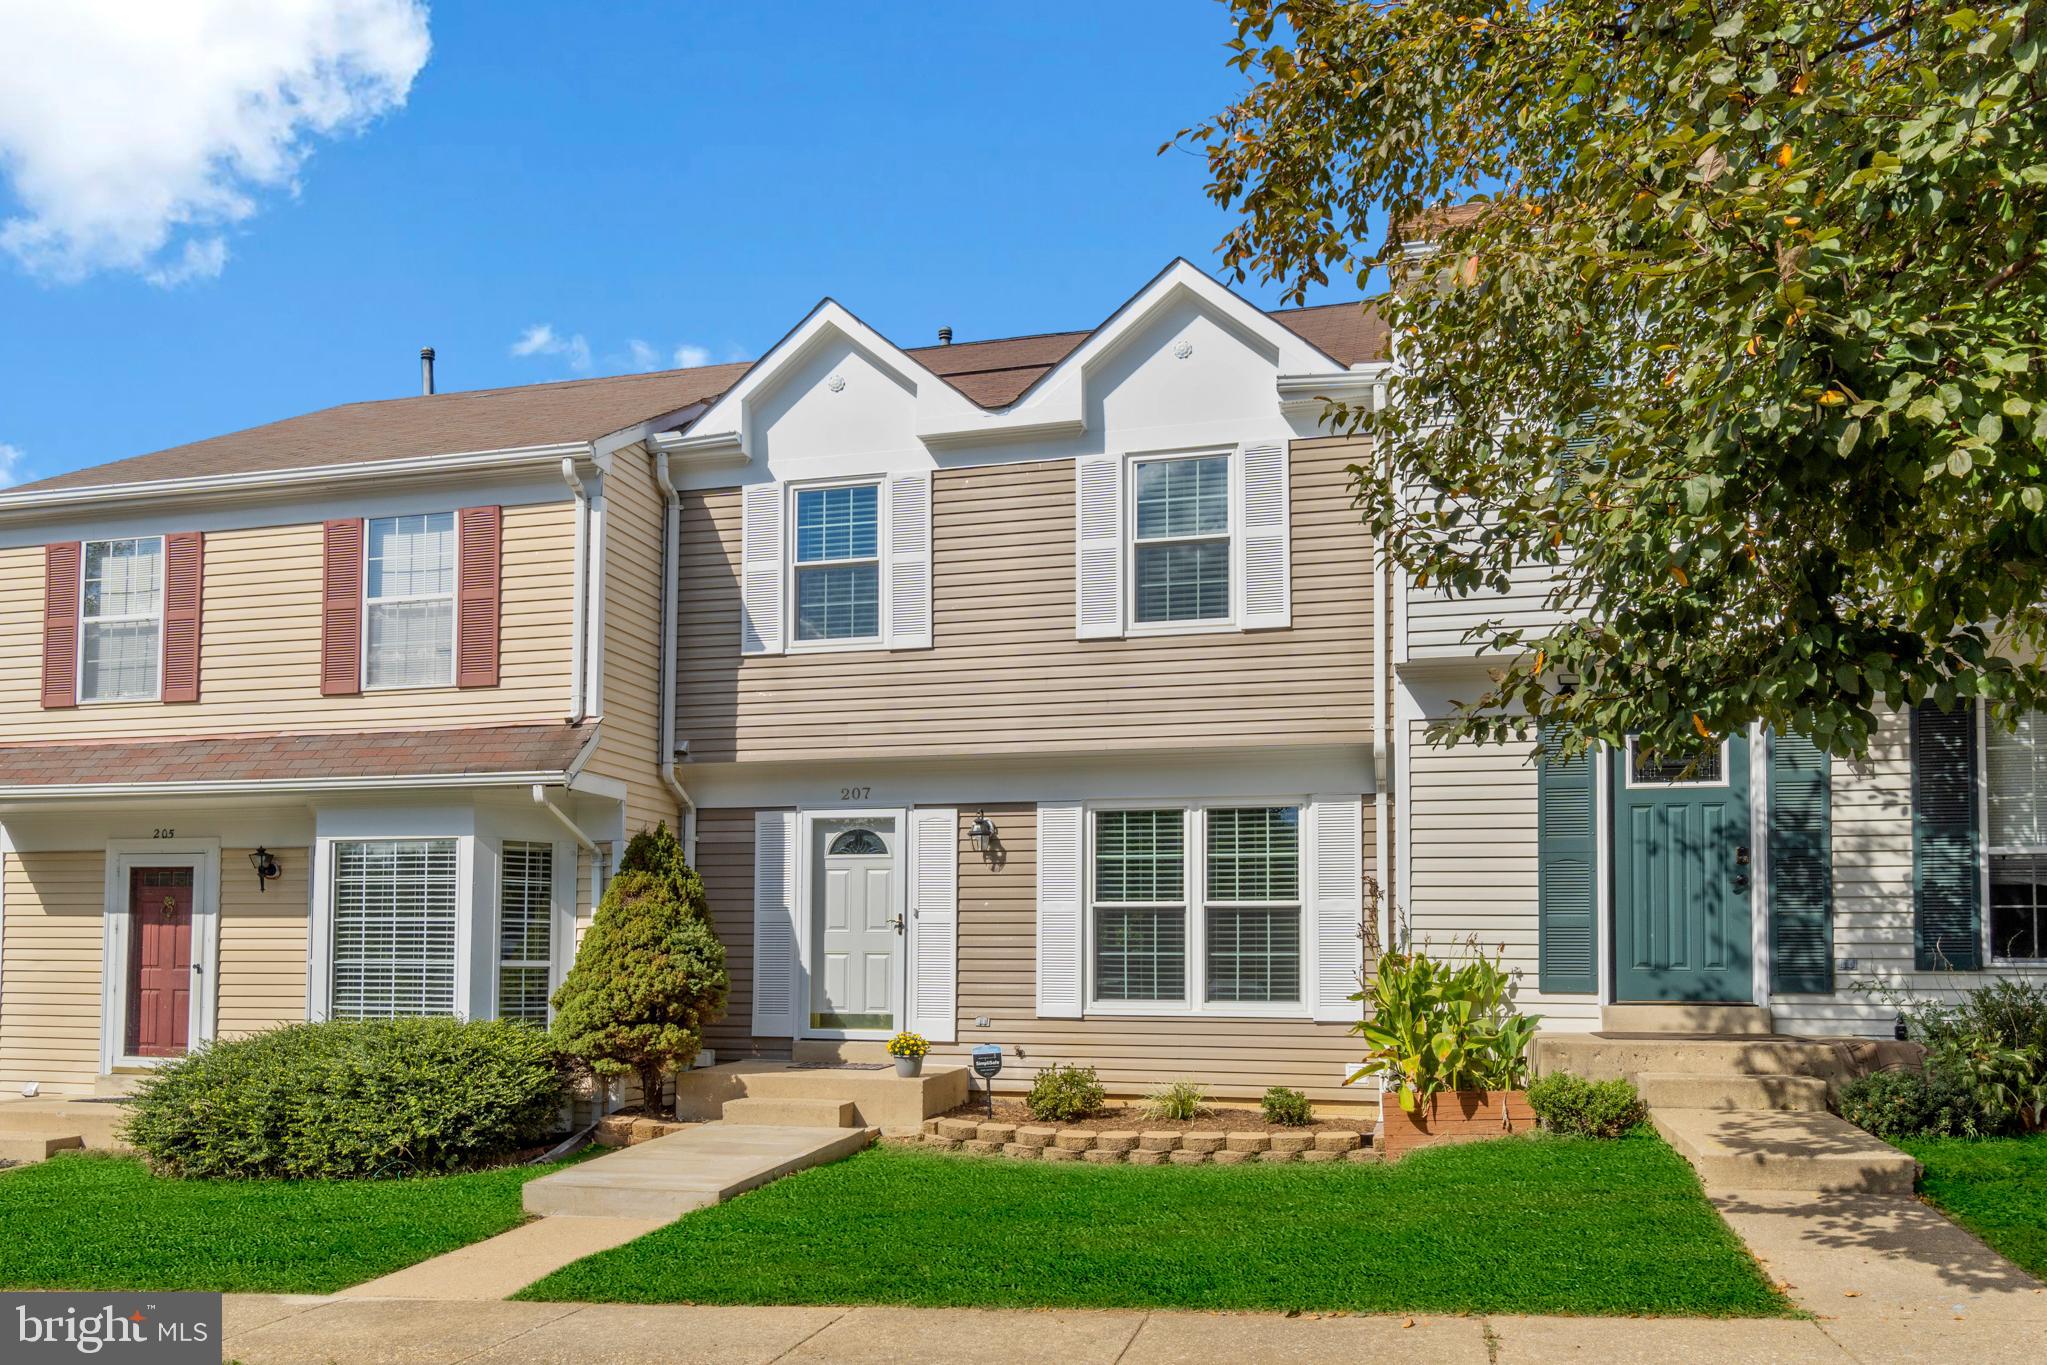 Swoop in on this charming townhome in the coveted Hampton Oaks community of North Stafford. From the